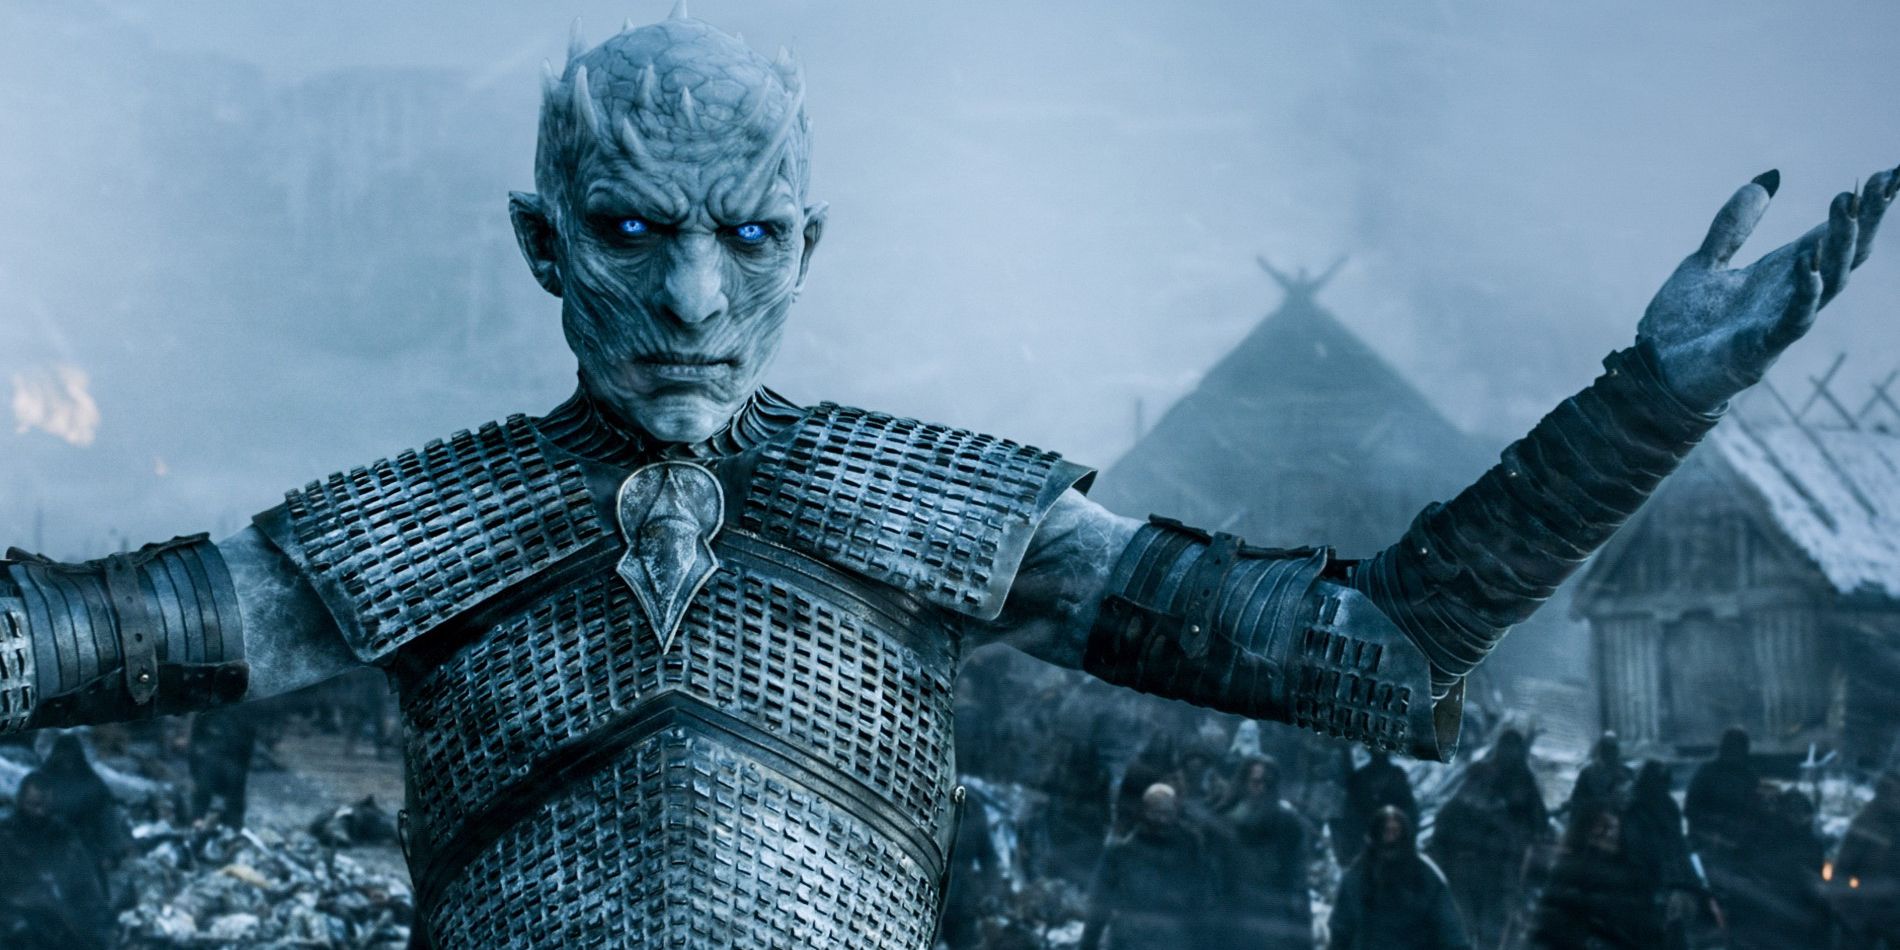 Winter King at the Hardhome Massacre on HBO's Game Of Thrones